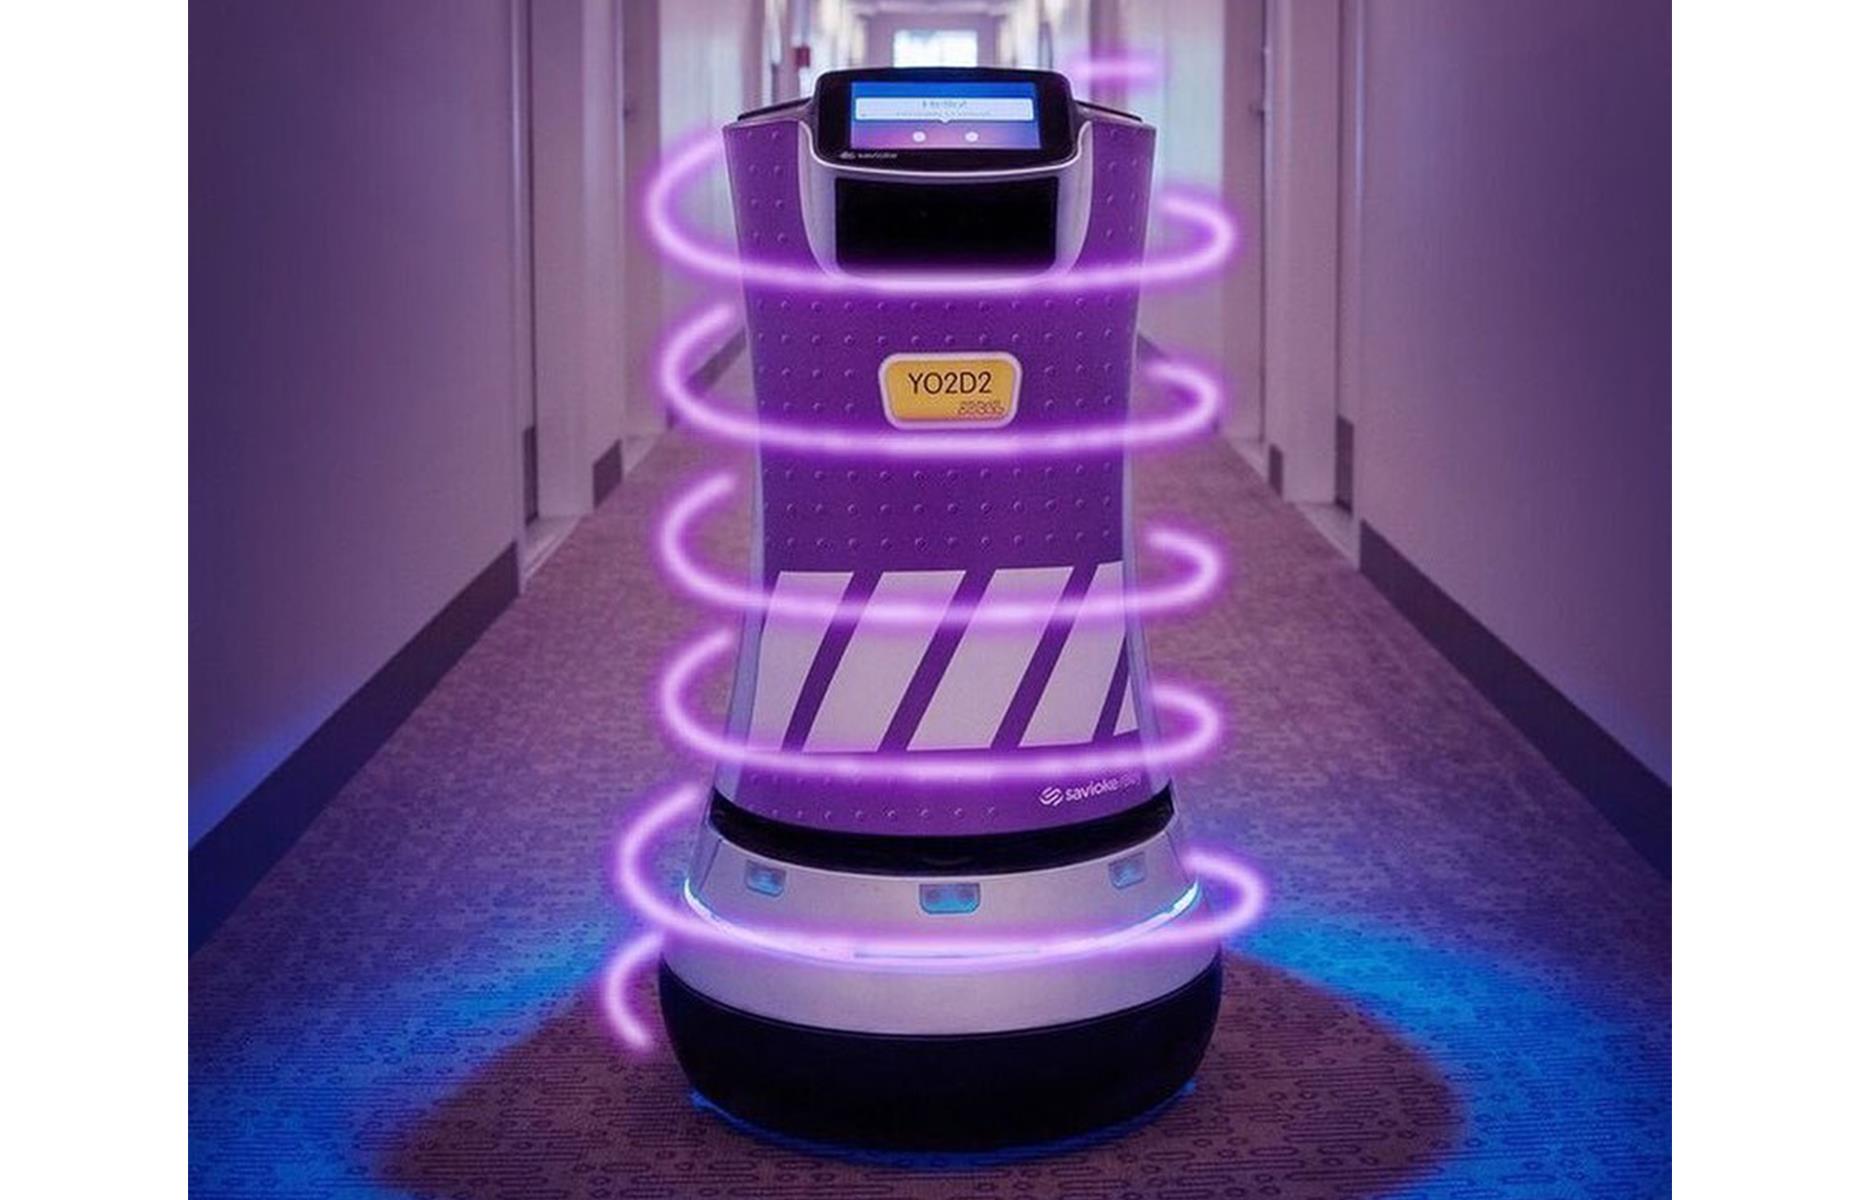 <p>US hotels are embracing robotics too. You’ll spot adorable robot YO2D2 flitting about <a href="https://www.yotel.com/en/hotels/yotel-boston">YOTEL Boston</a>, entertaining travelers and performing basic customer services. YO2D2 brings towels and linens to guest rooms, delivers purchases and summons elevators. He’s available for selfies too. </p>